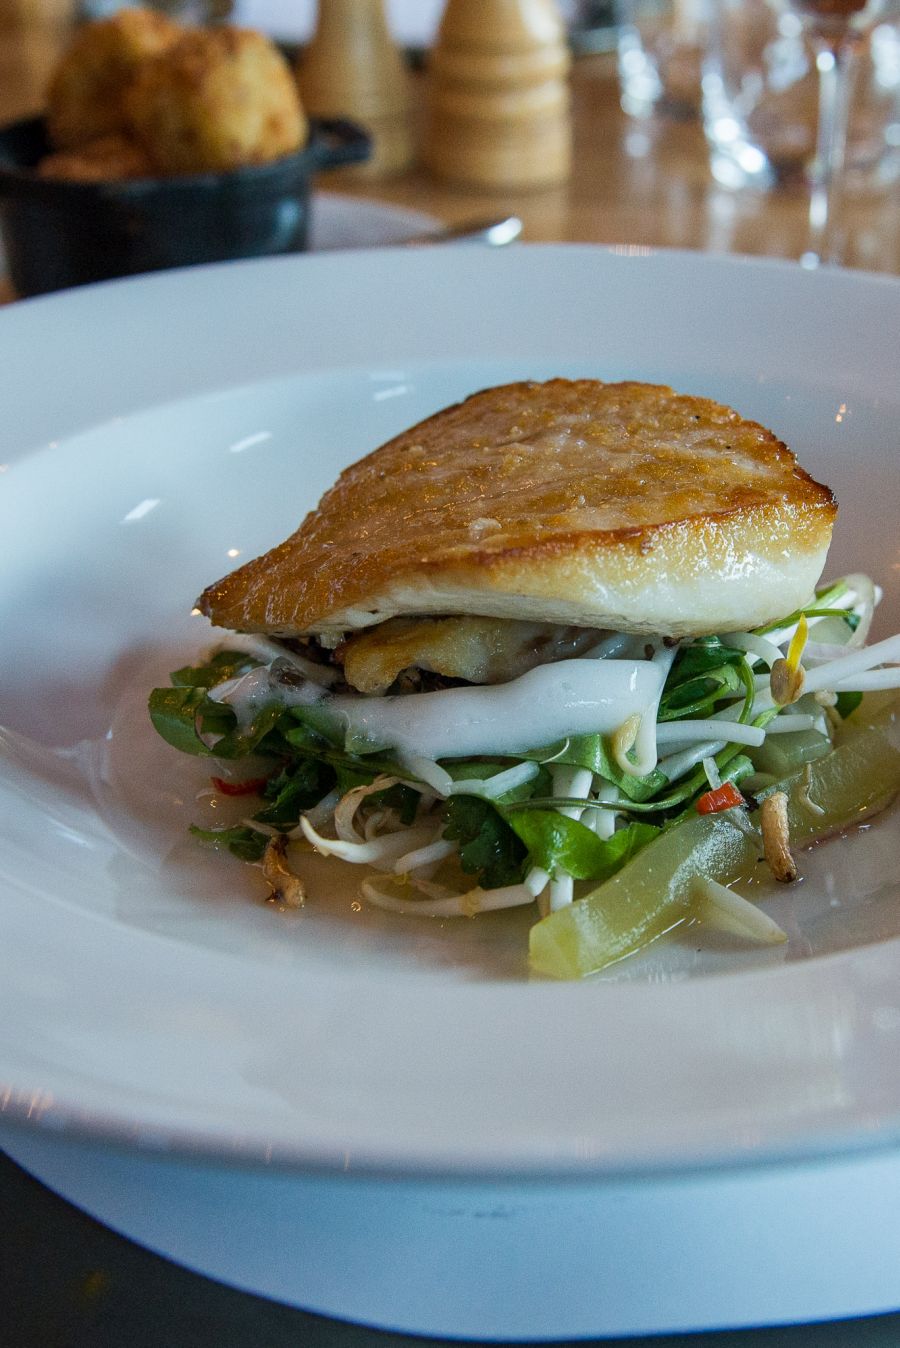 Pan-fried line caught fish, cucumber, garden herb salad, sprouts, chilli and kaffir lime (NZ$37.50) - the fish of the day was blue nose.